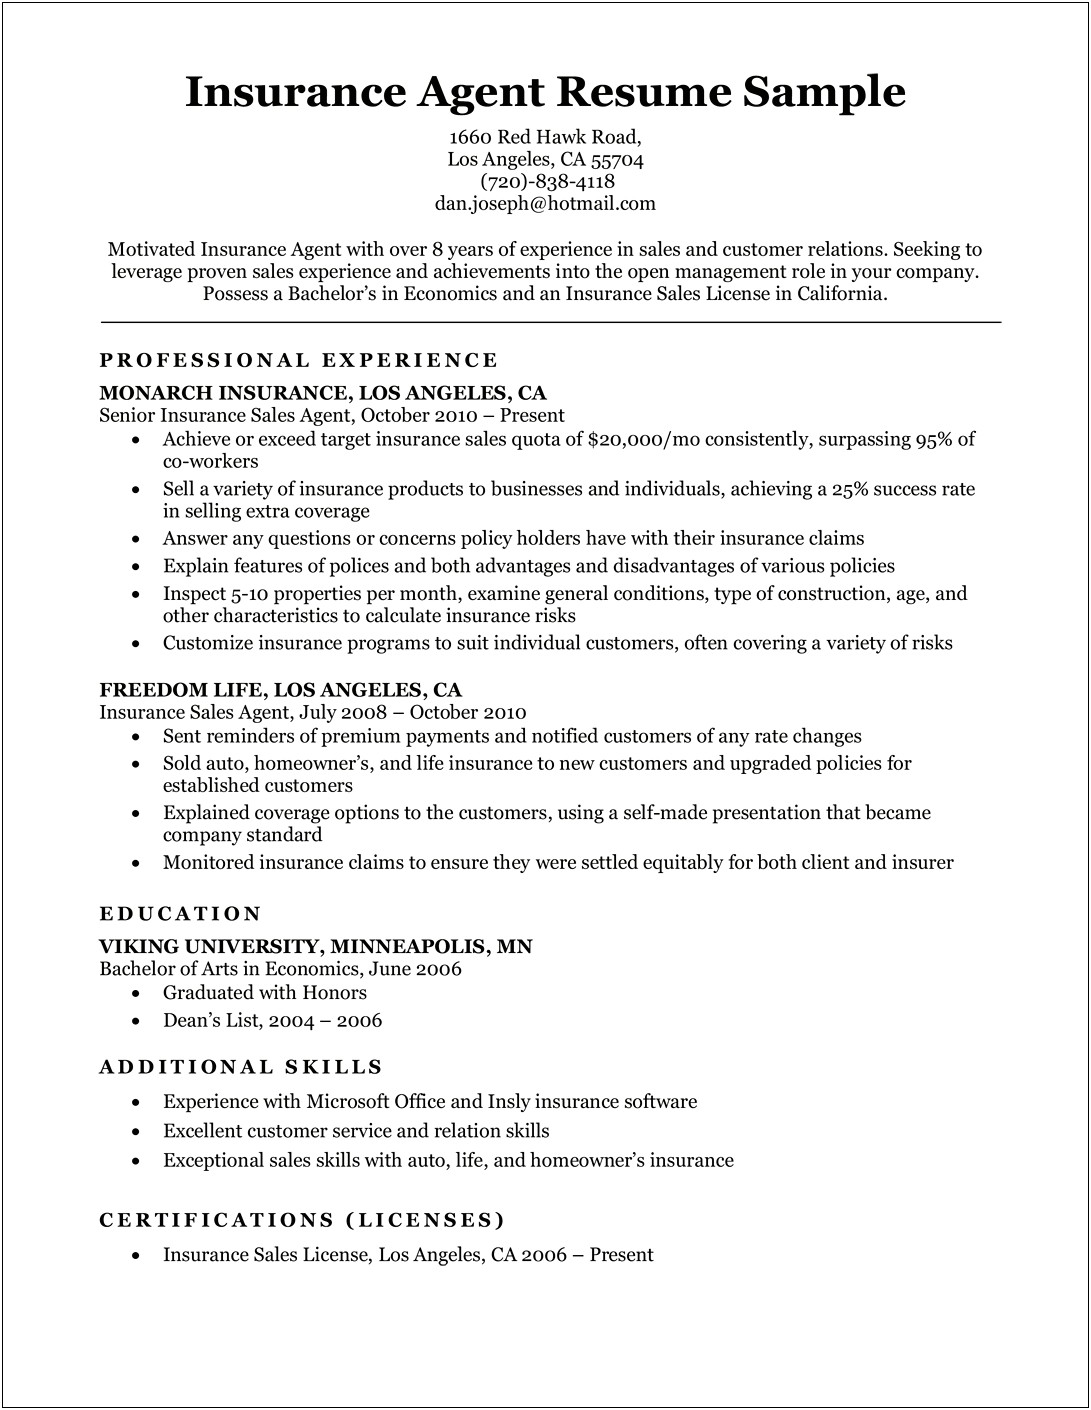 About Myself Sample For Resume